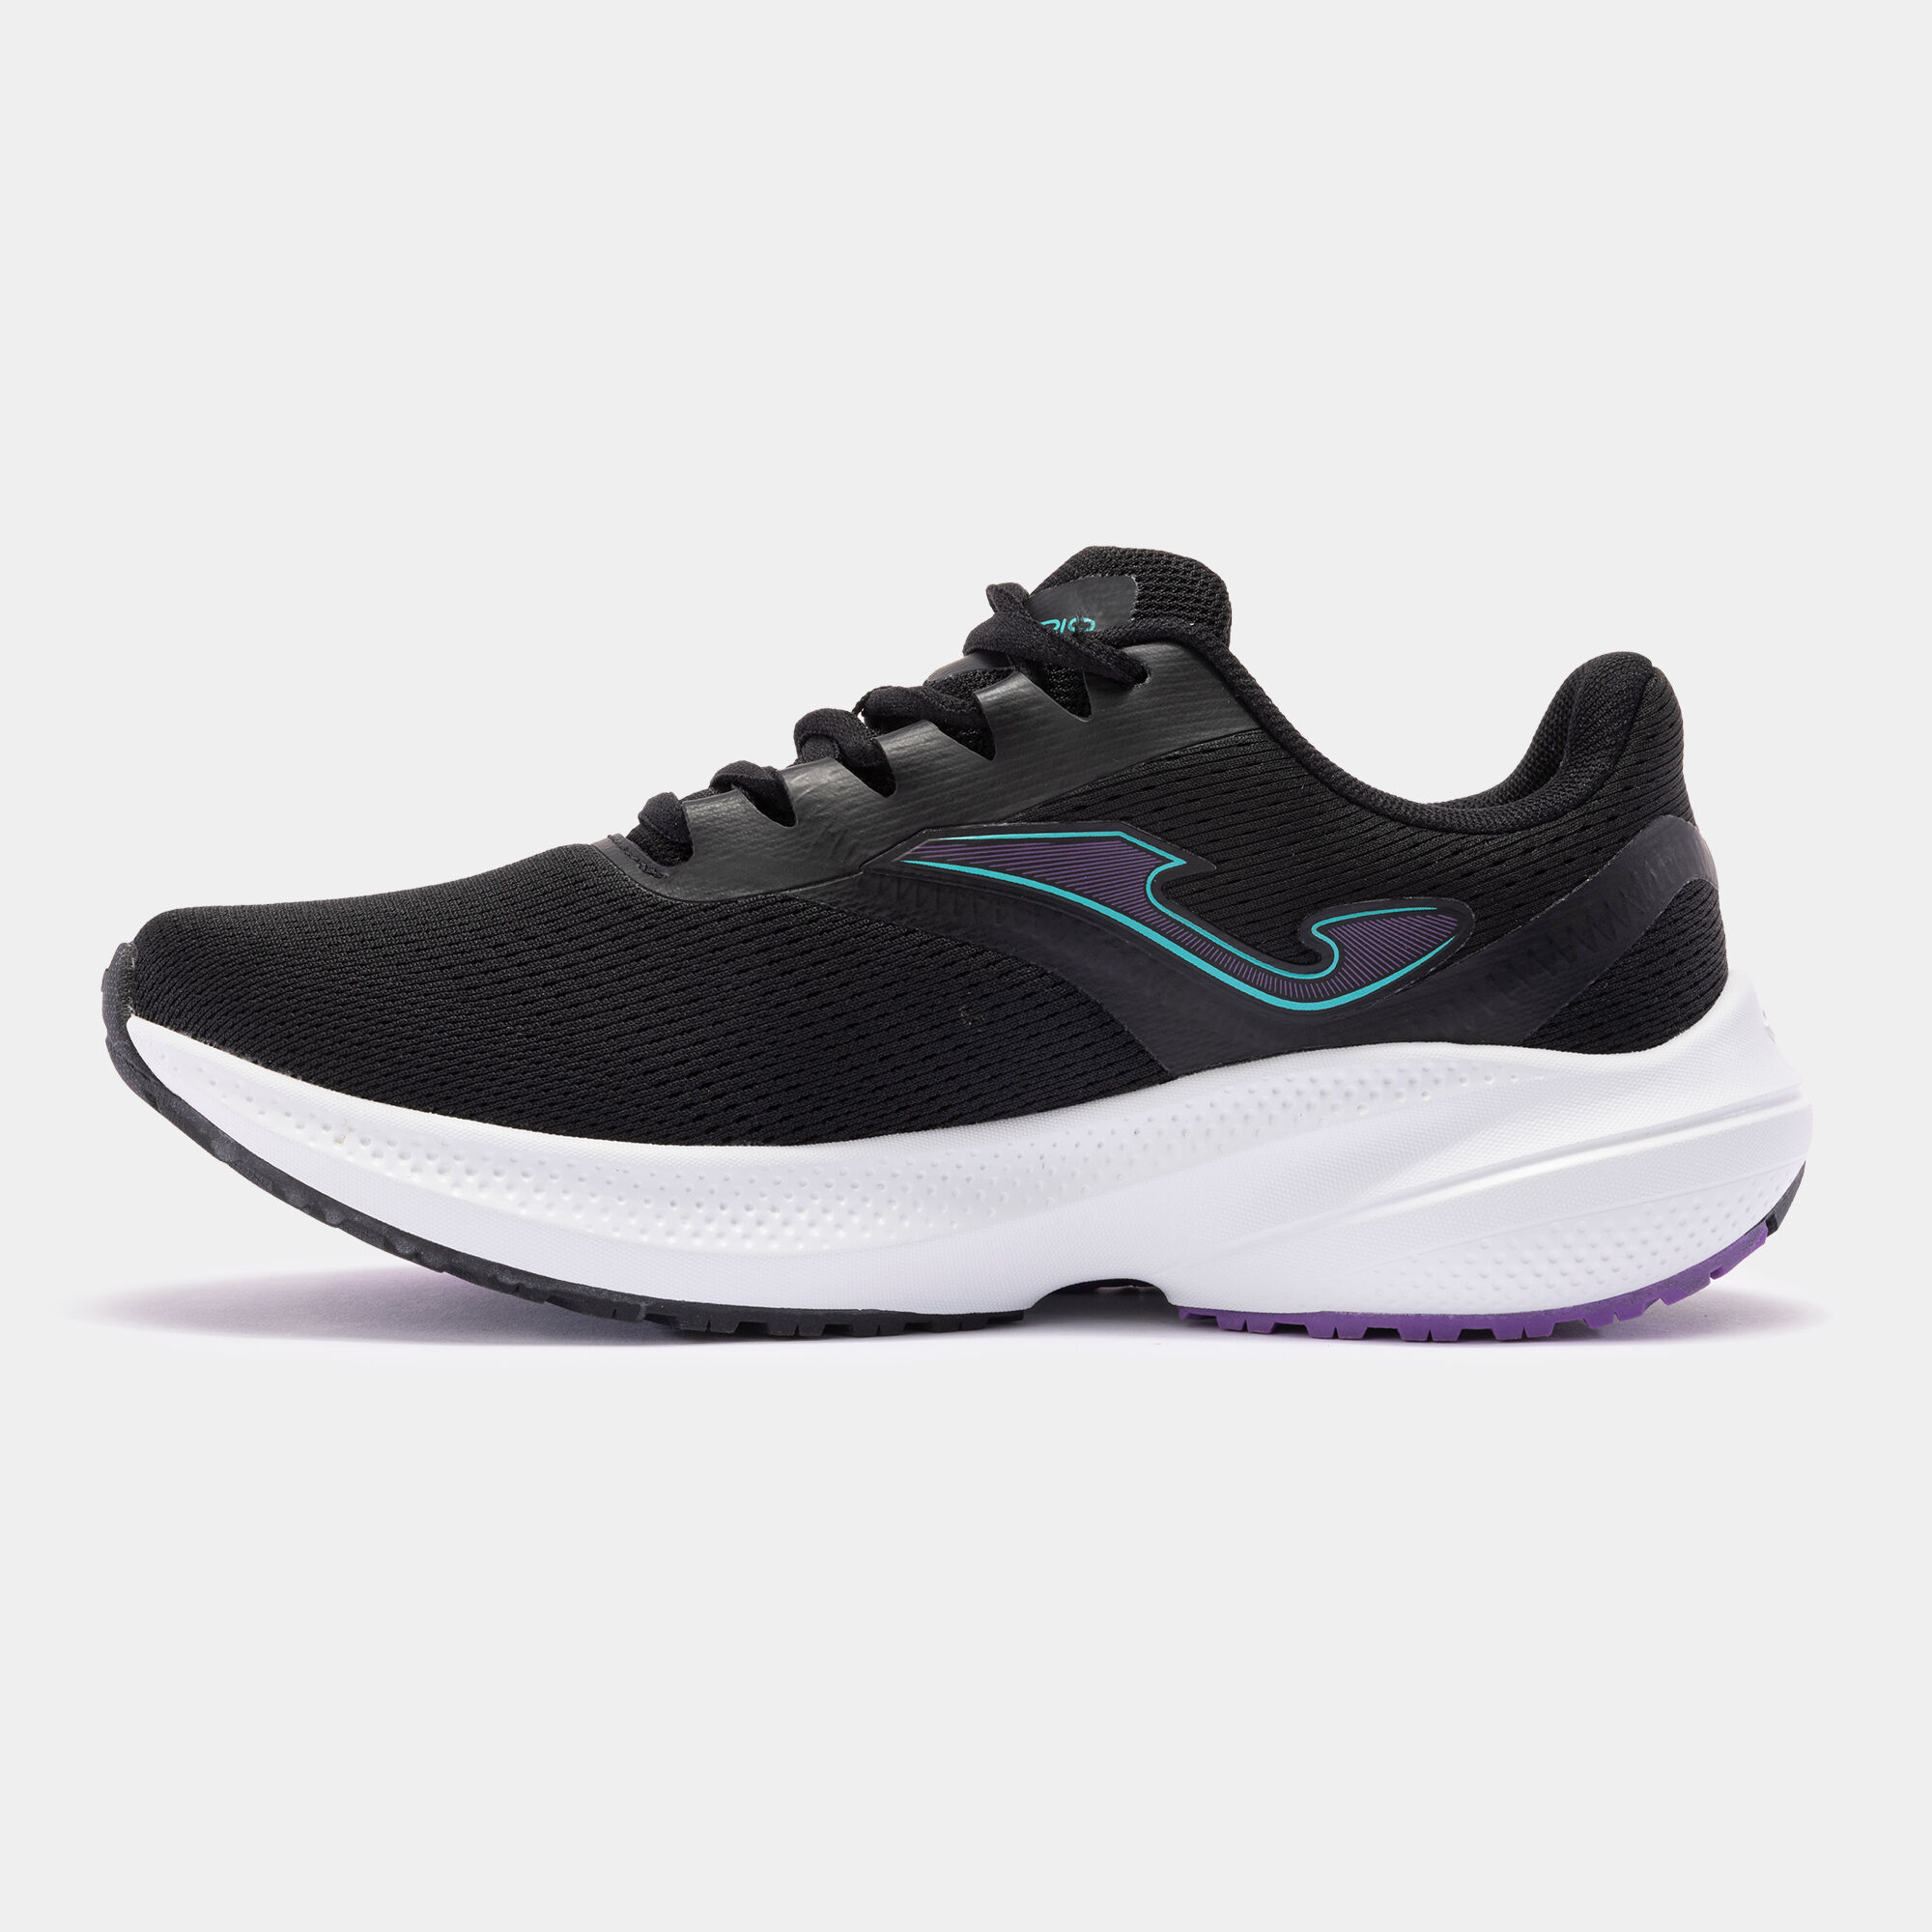 Running shoes Rodio Lady 24 woman black